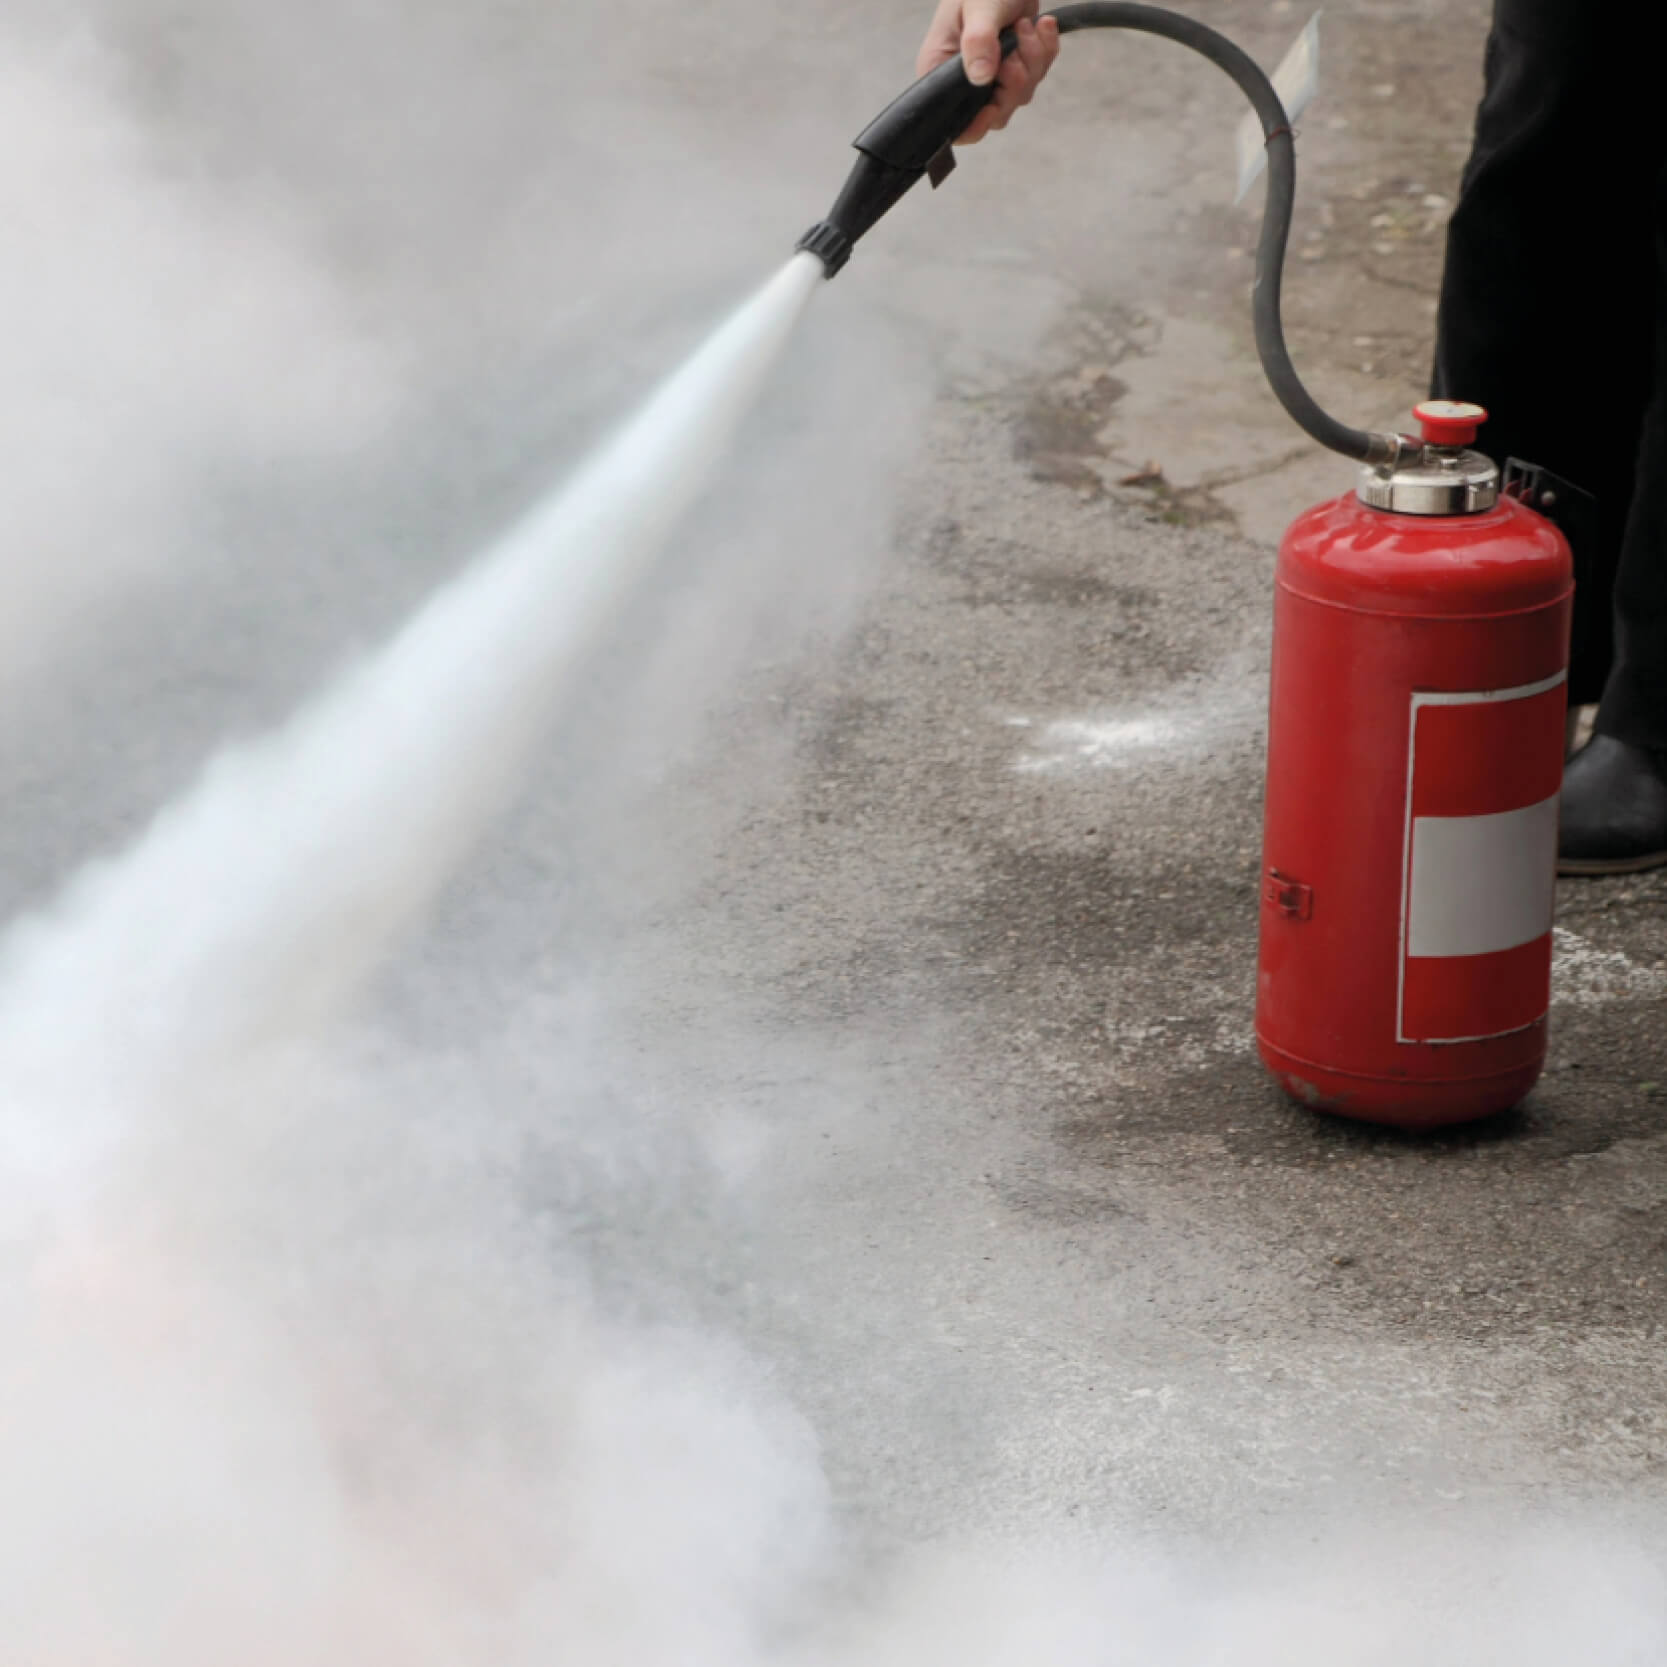 Fire extinguisher being used after completing the NEBOSH Fire Safety course